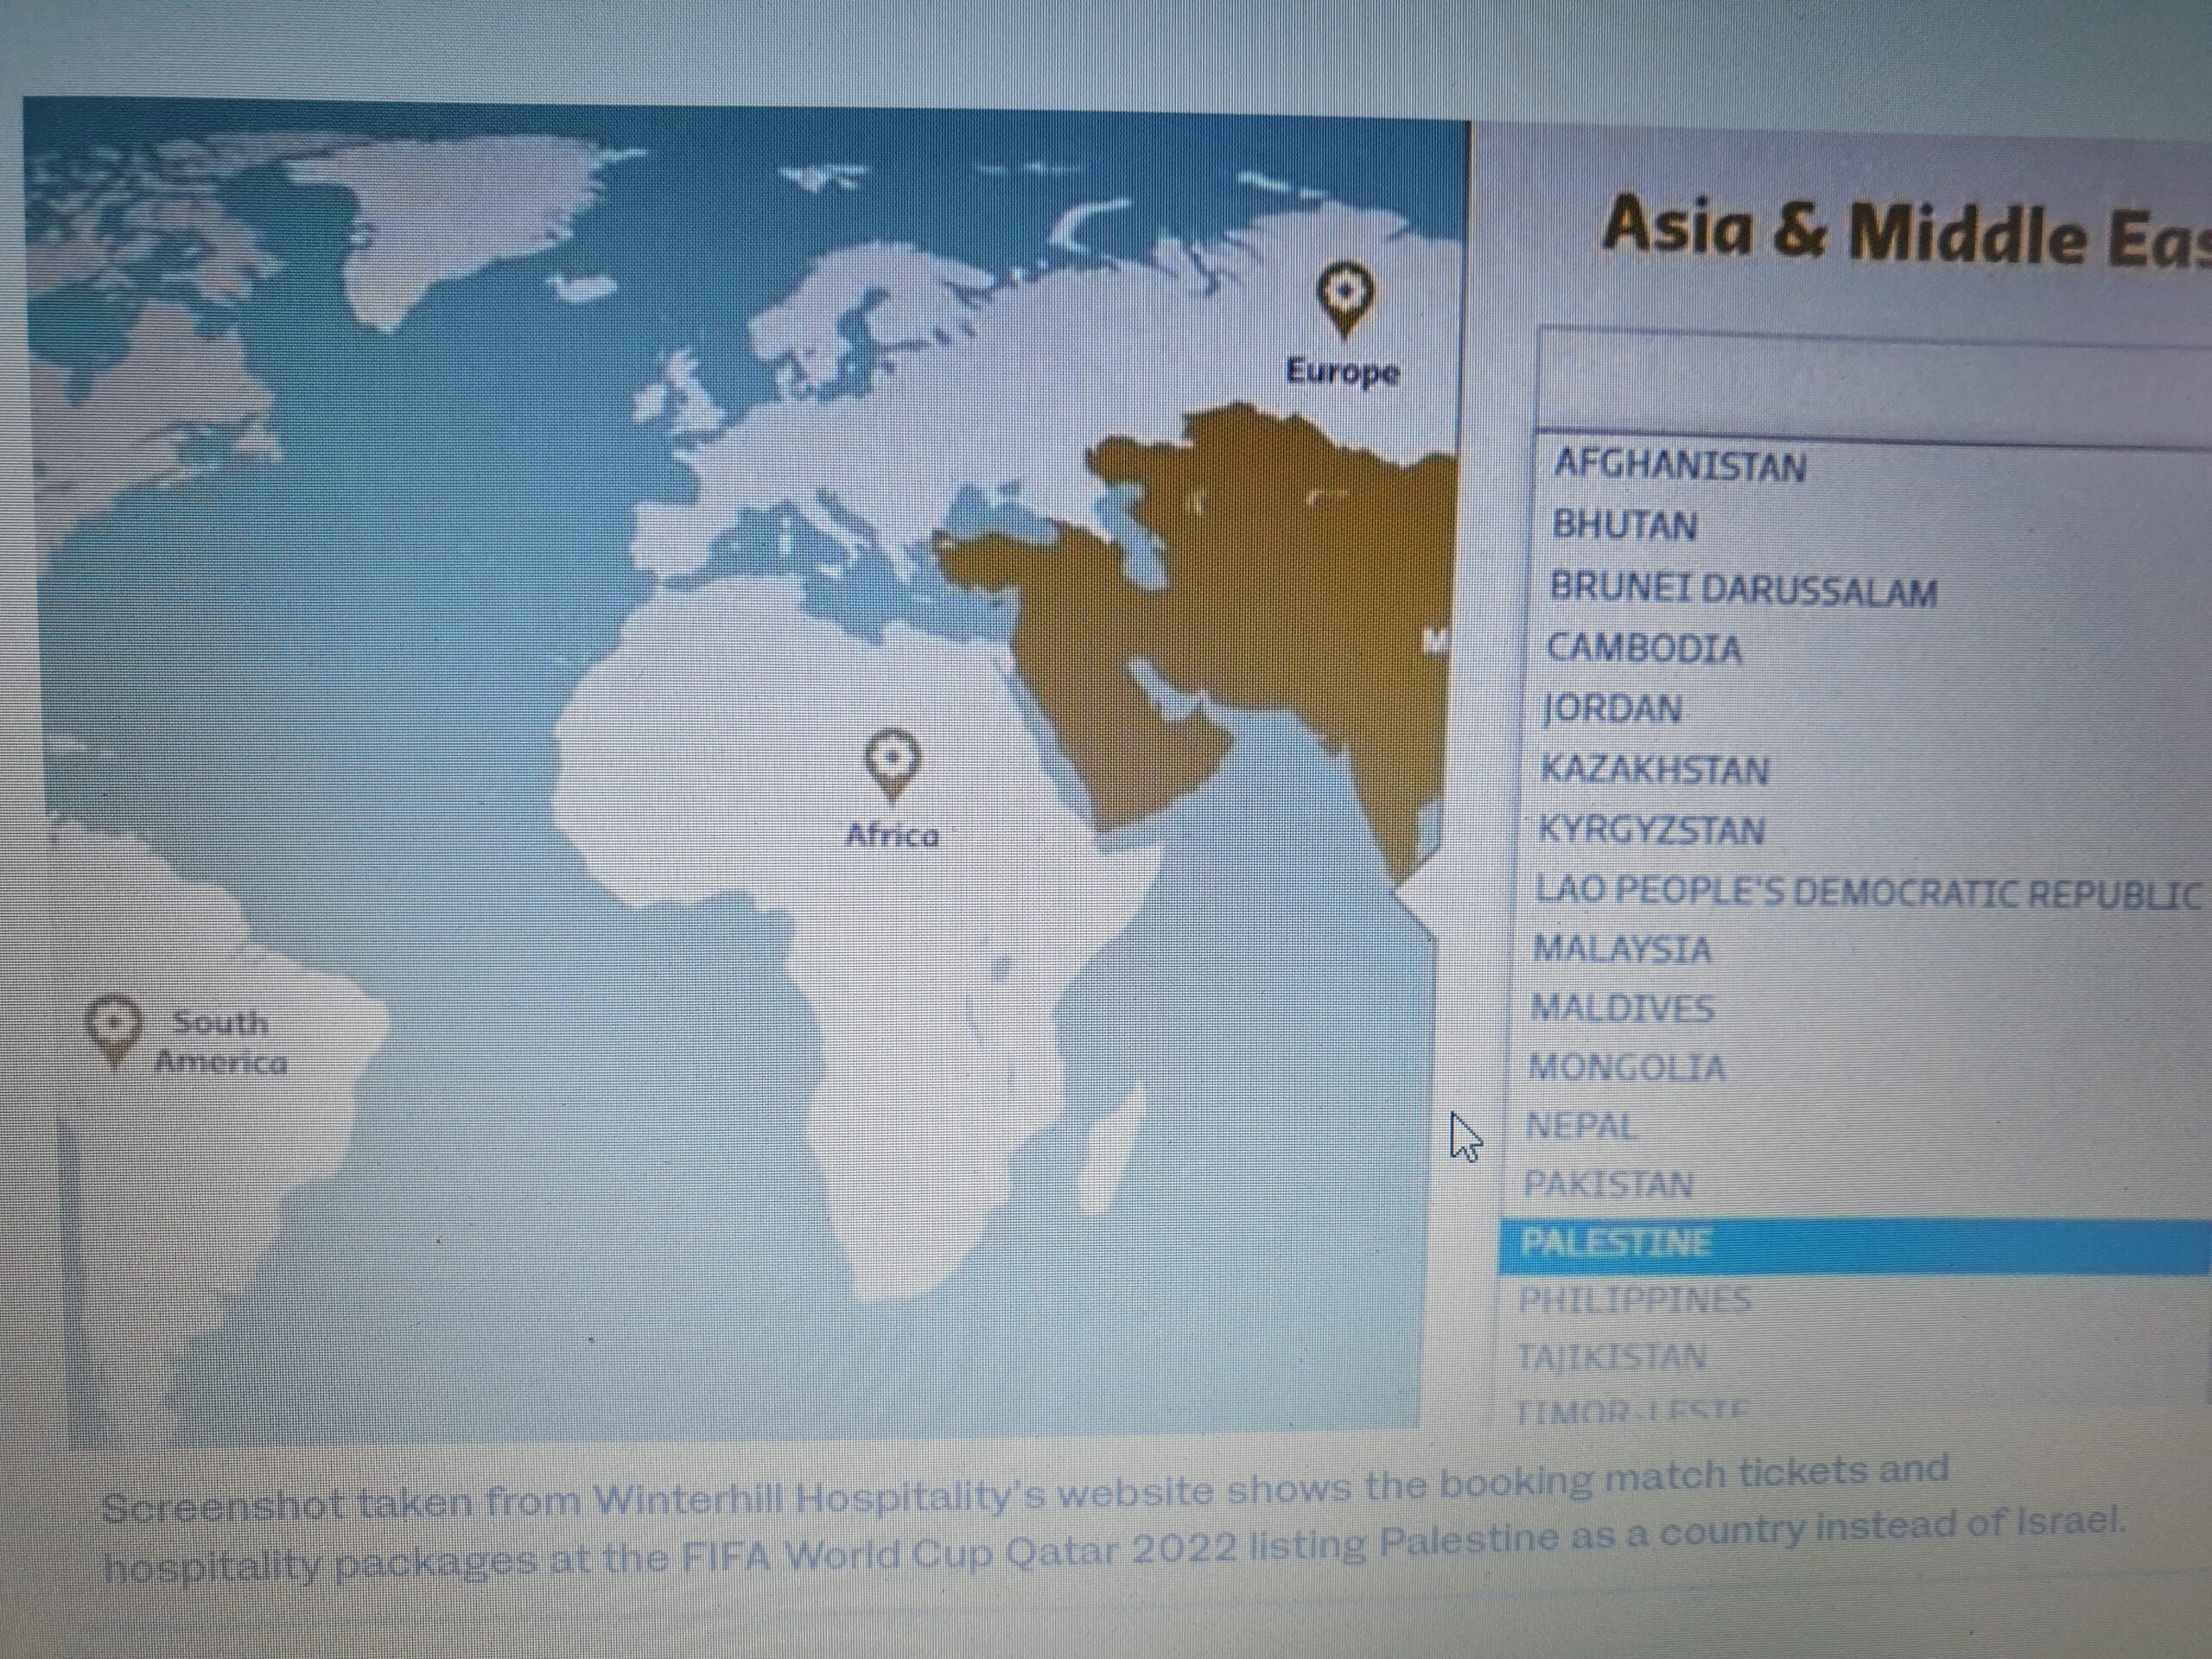 FIFA World Cup hospitality website continues to exclude Israel, lists Palestine instead